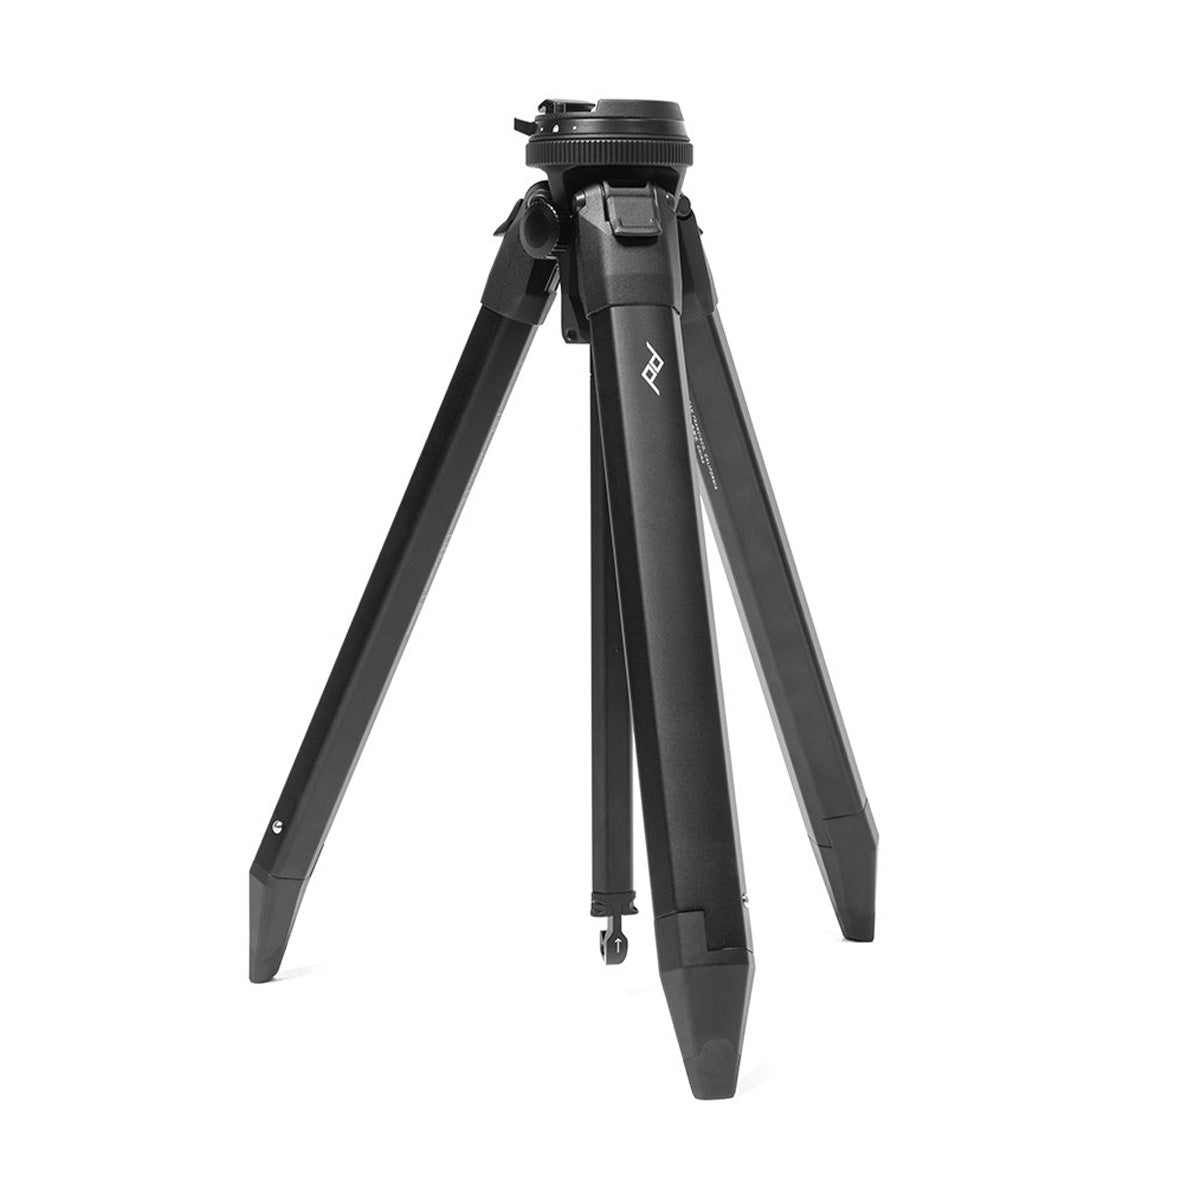 image_note Tripod sold separately